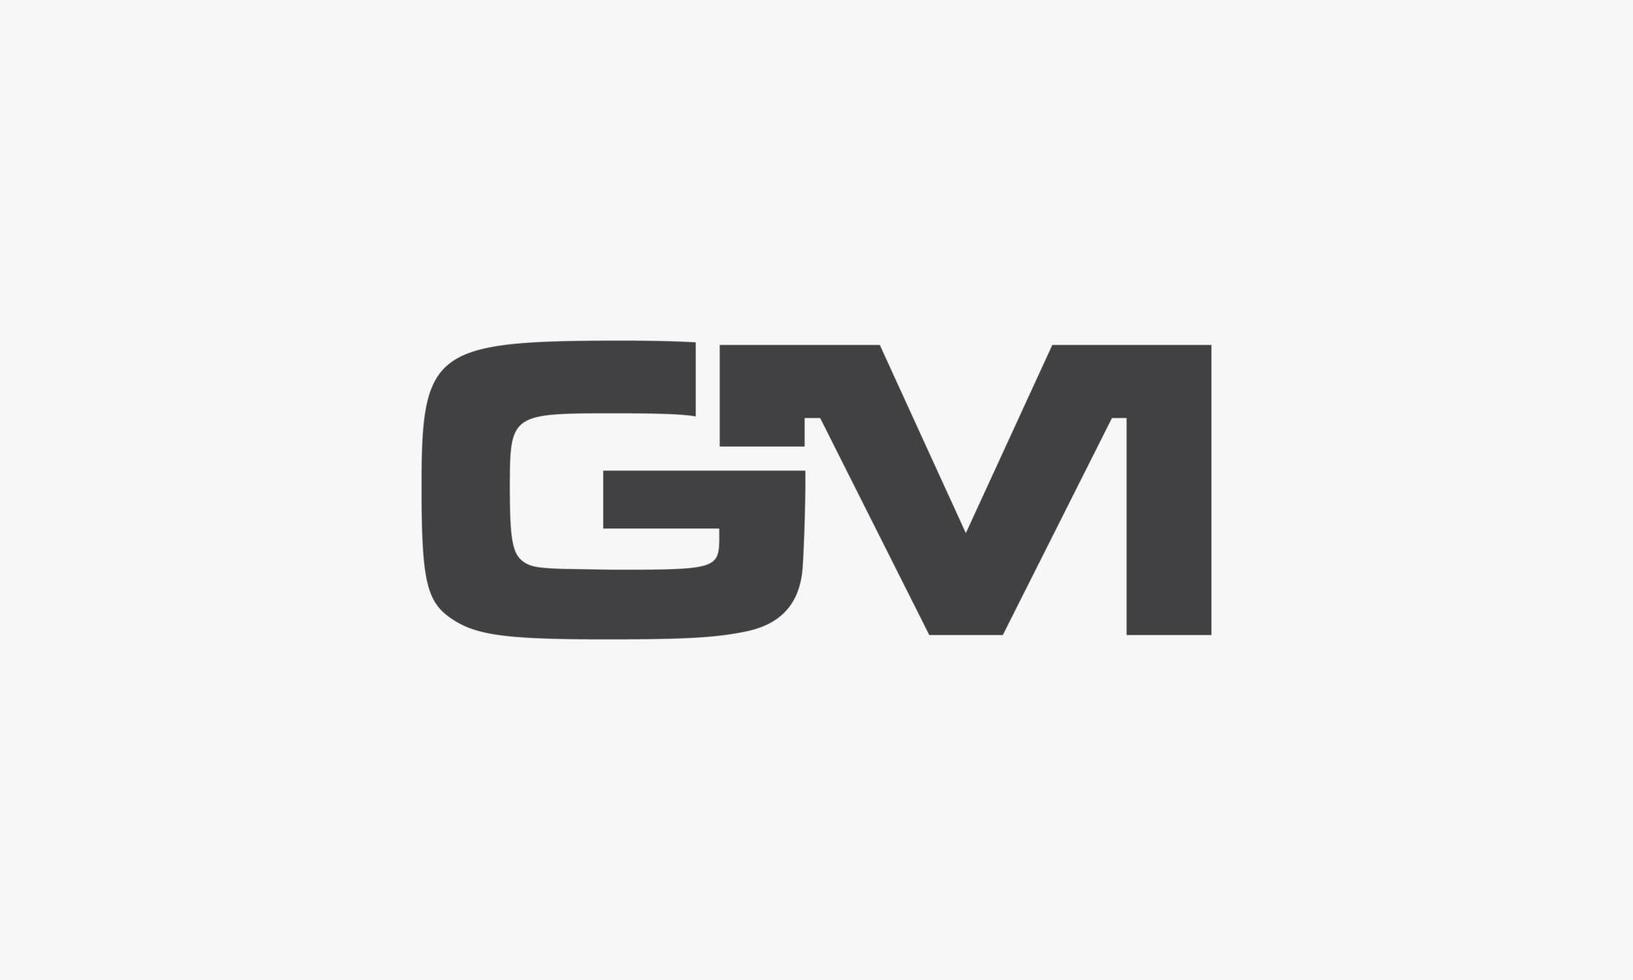 GM letter logo isolated on white background. vector